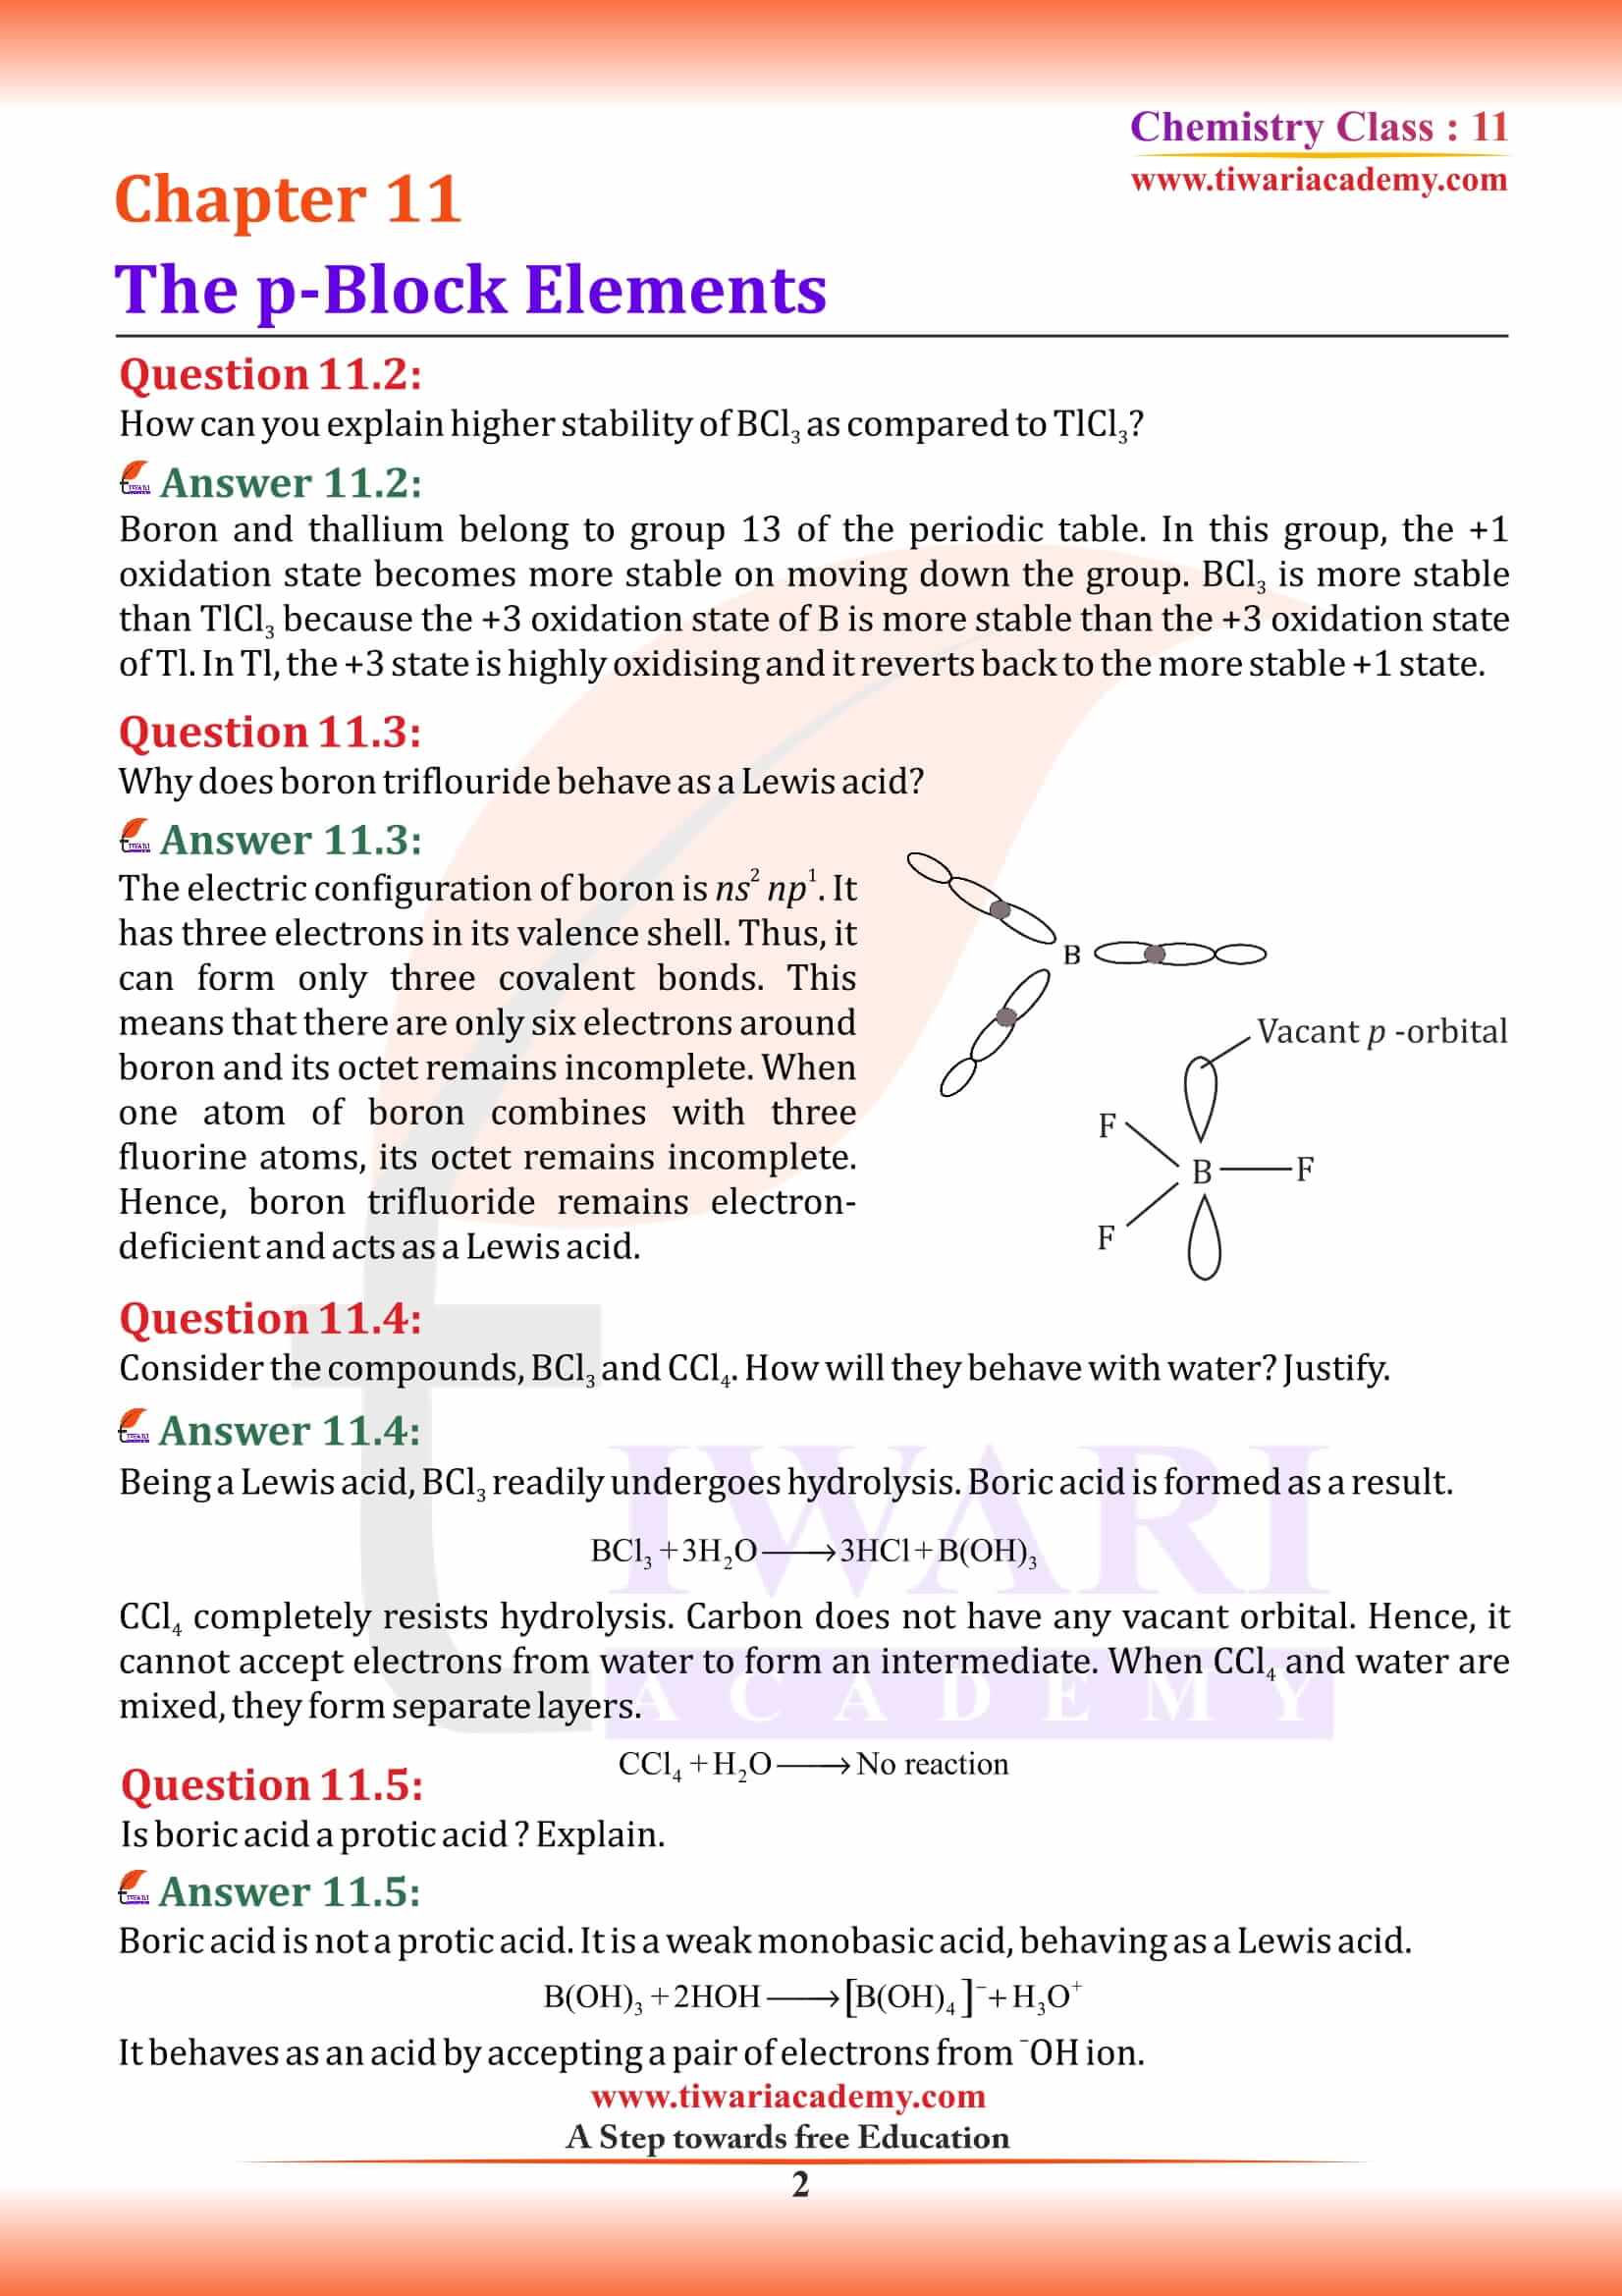 NCERT Solutions for Class 11 Chemistry Chapter 11